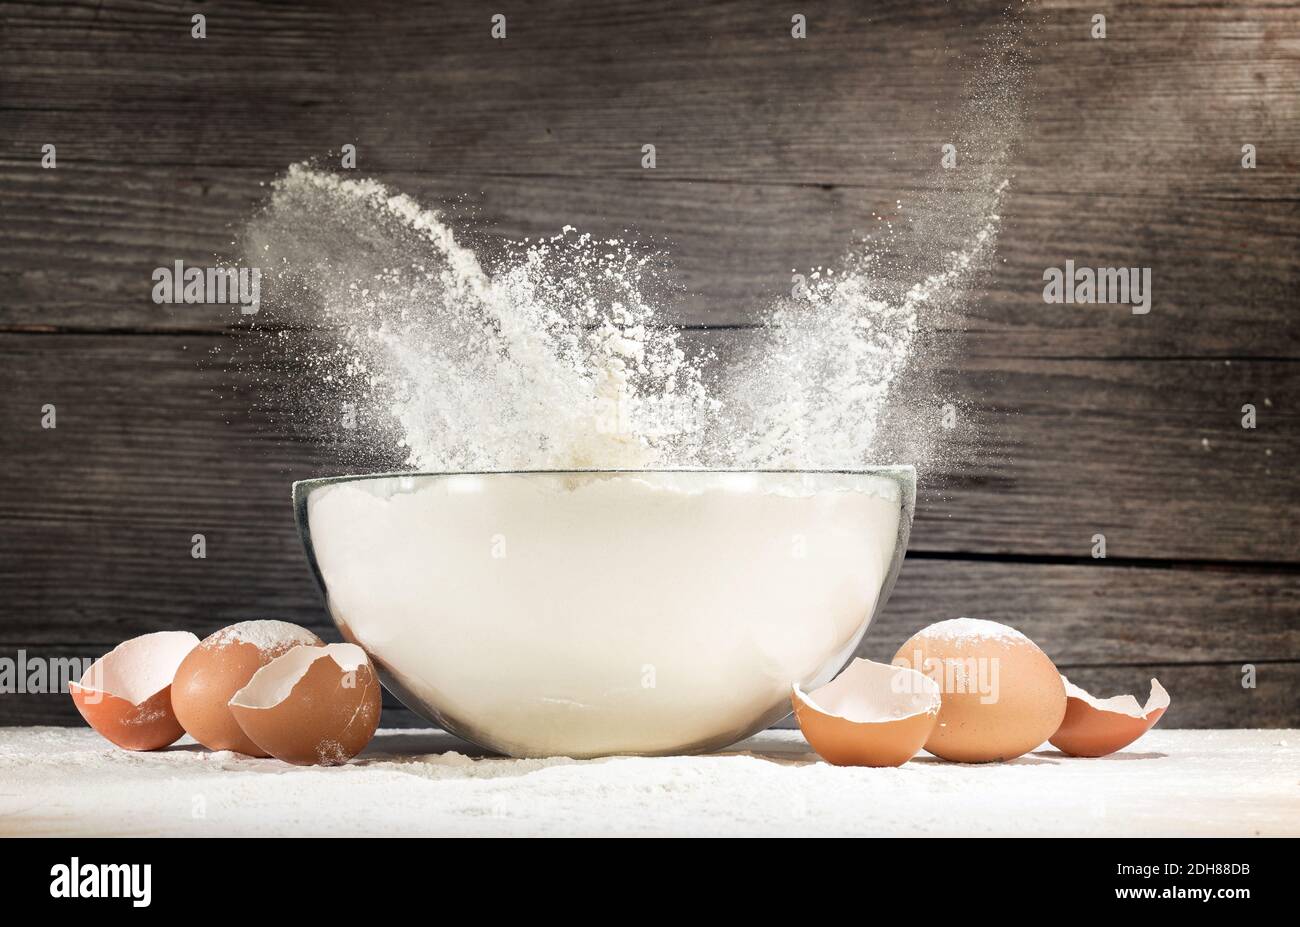 white flour splashing out of a glass bowl and eggshells on rustic background Stock Photo